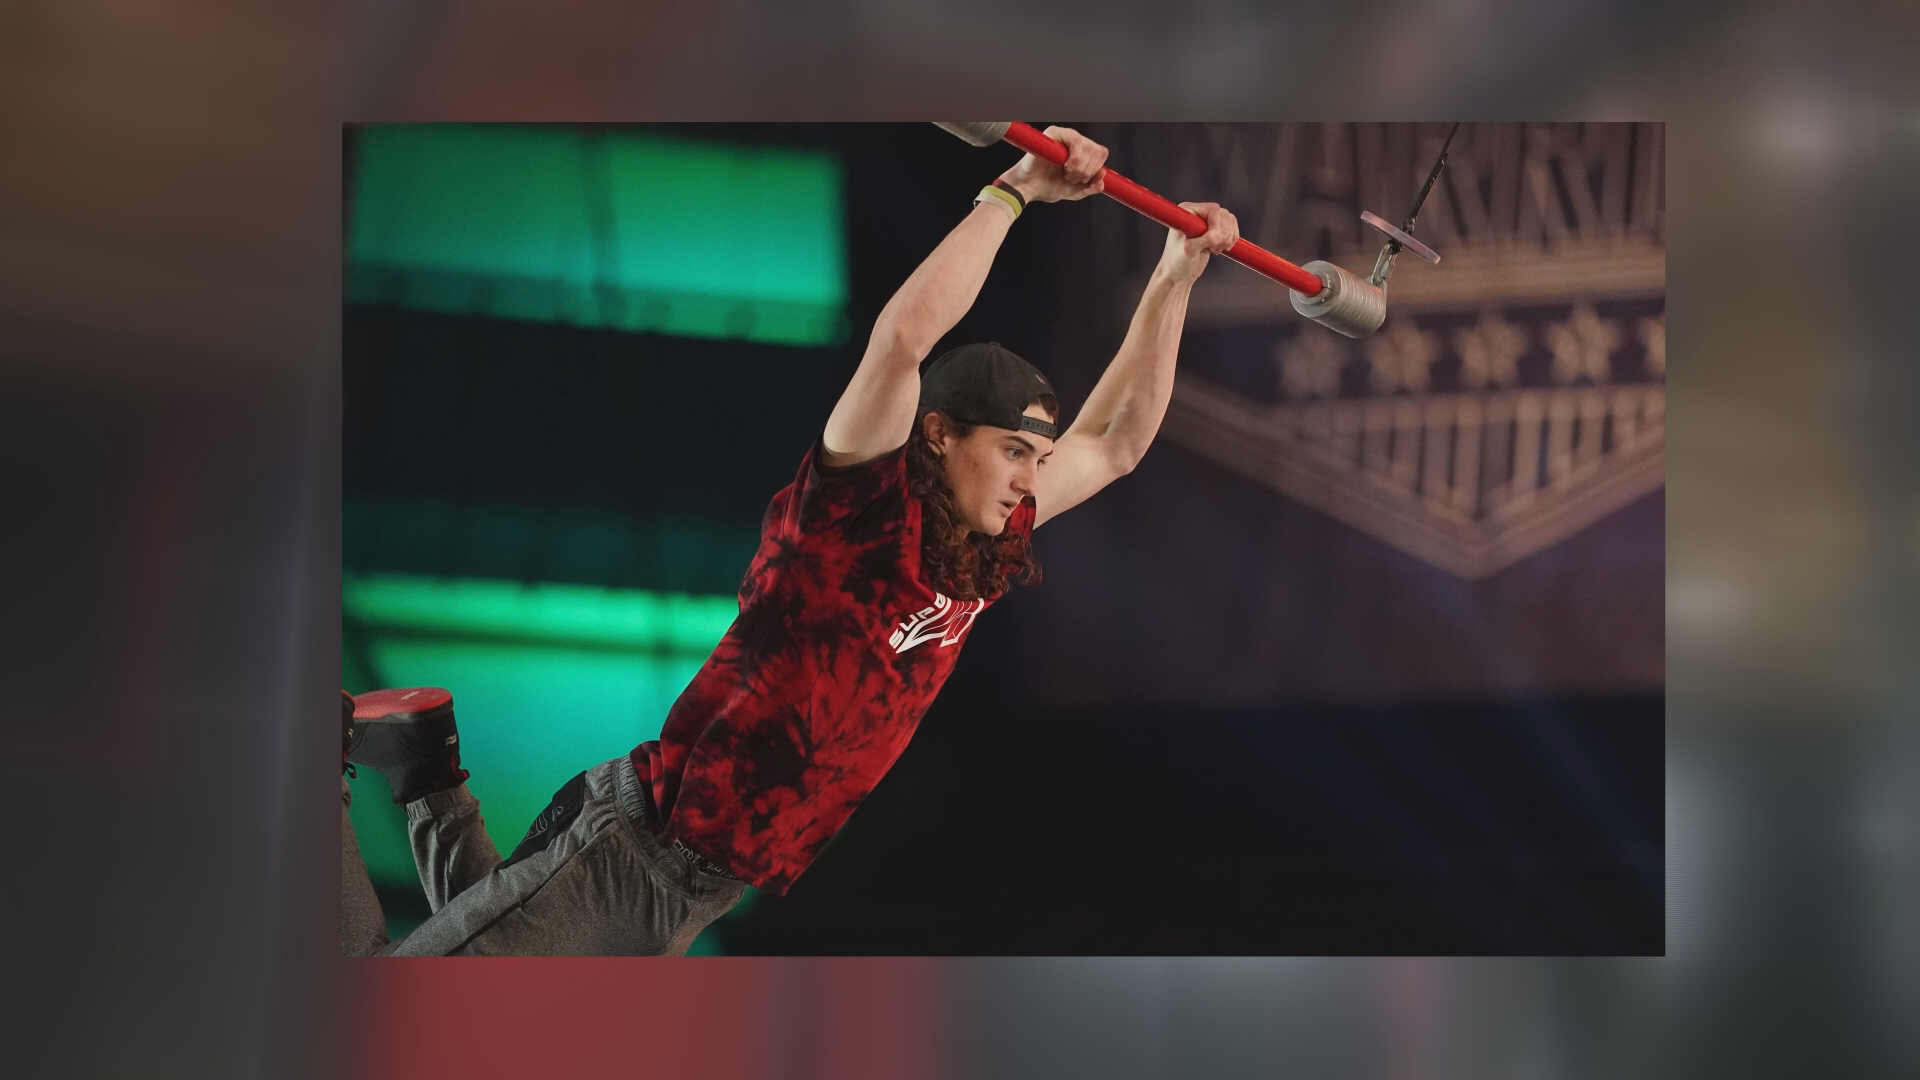 In past years, American Ninja Warriors needed to be 19 or older to compete on the show. This year, the show invited about 30 teenagers to try out.